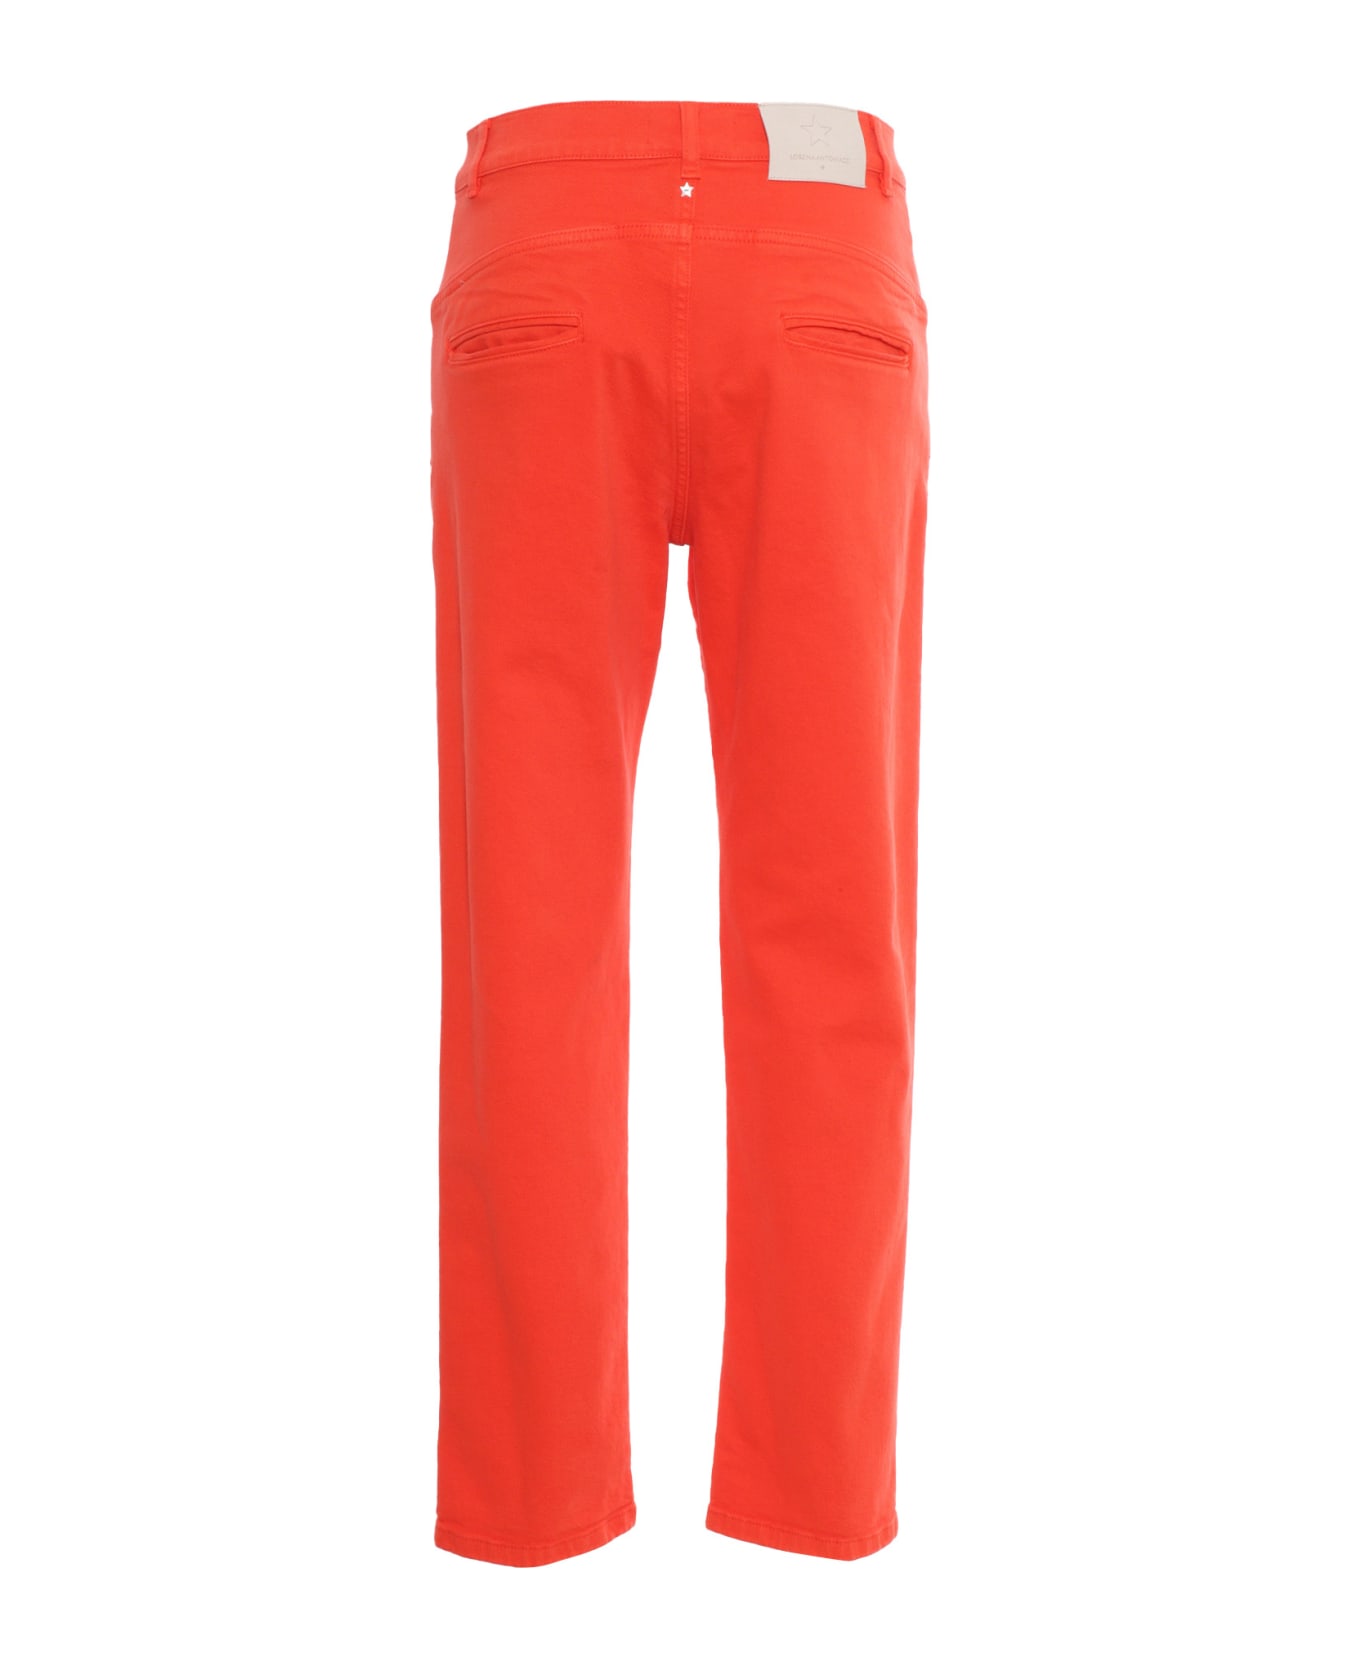 Lorena Antoniazzi Red Trousers - RED